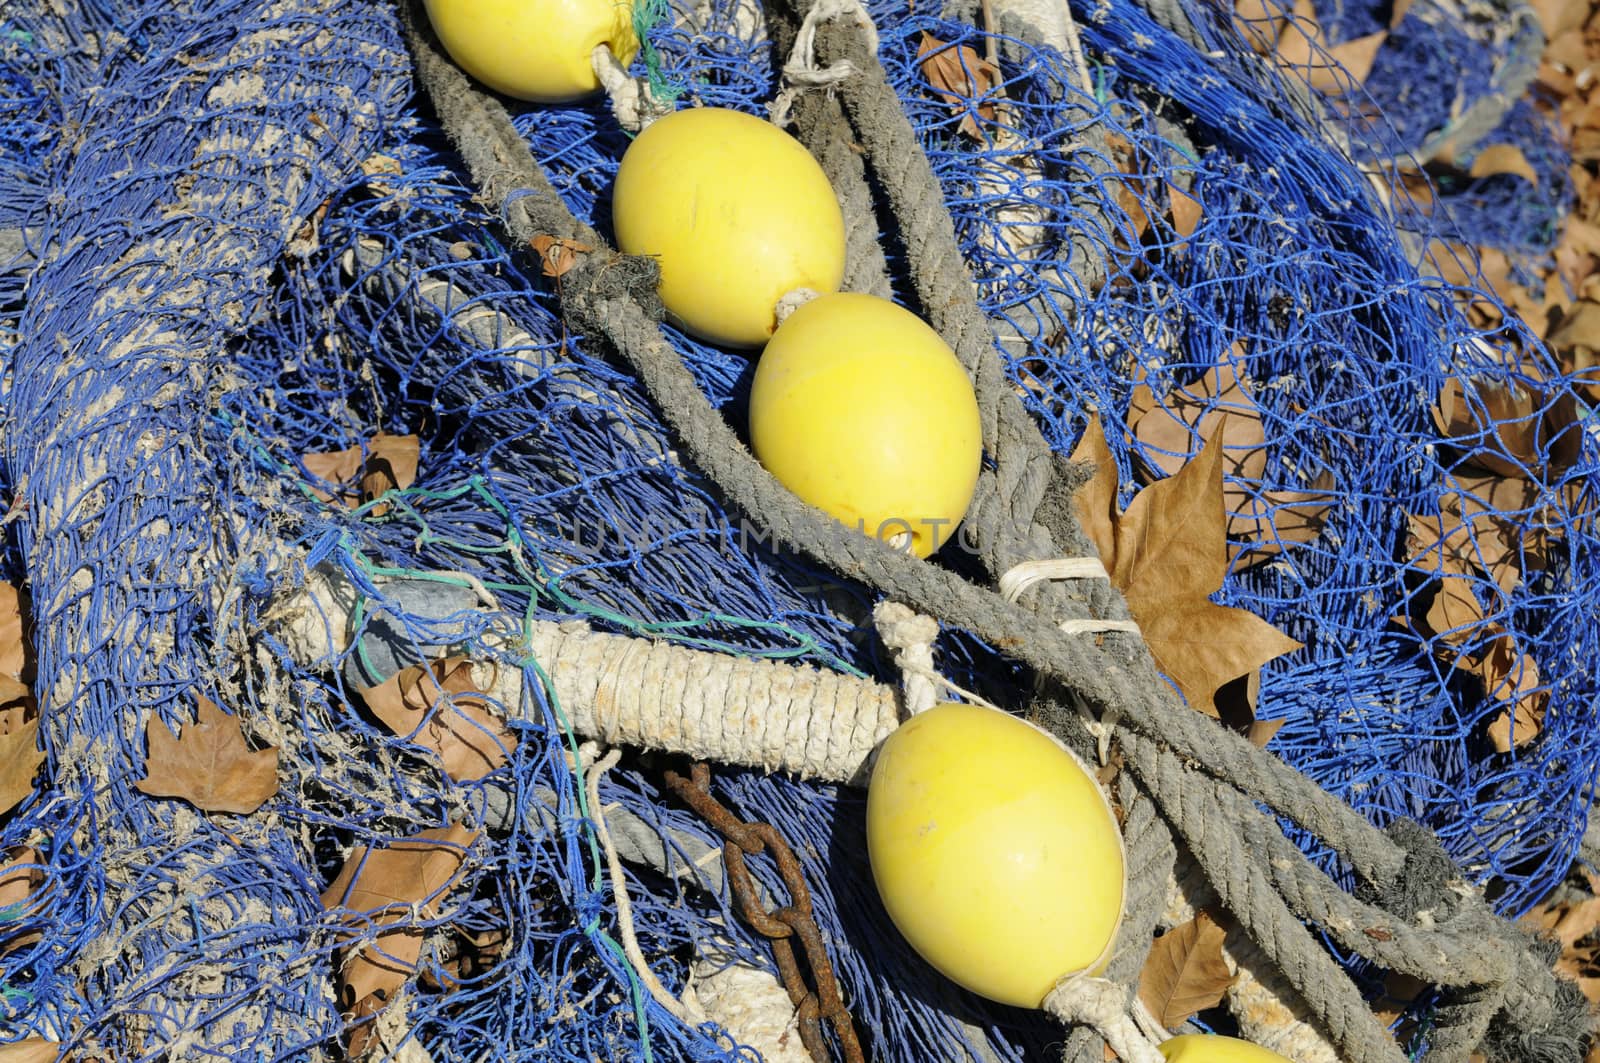 Fishing net with yellow floats laid out to dry.